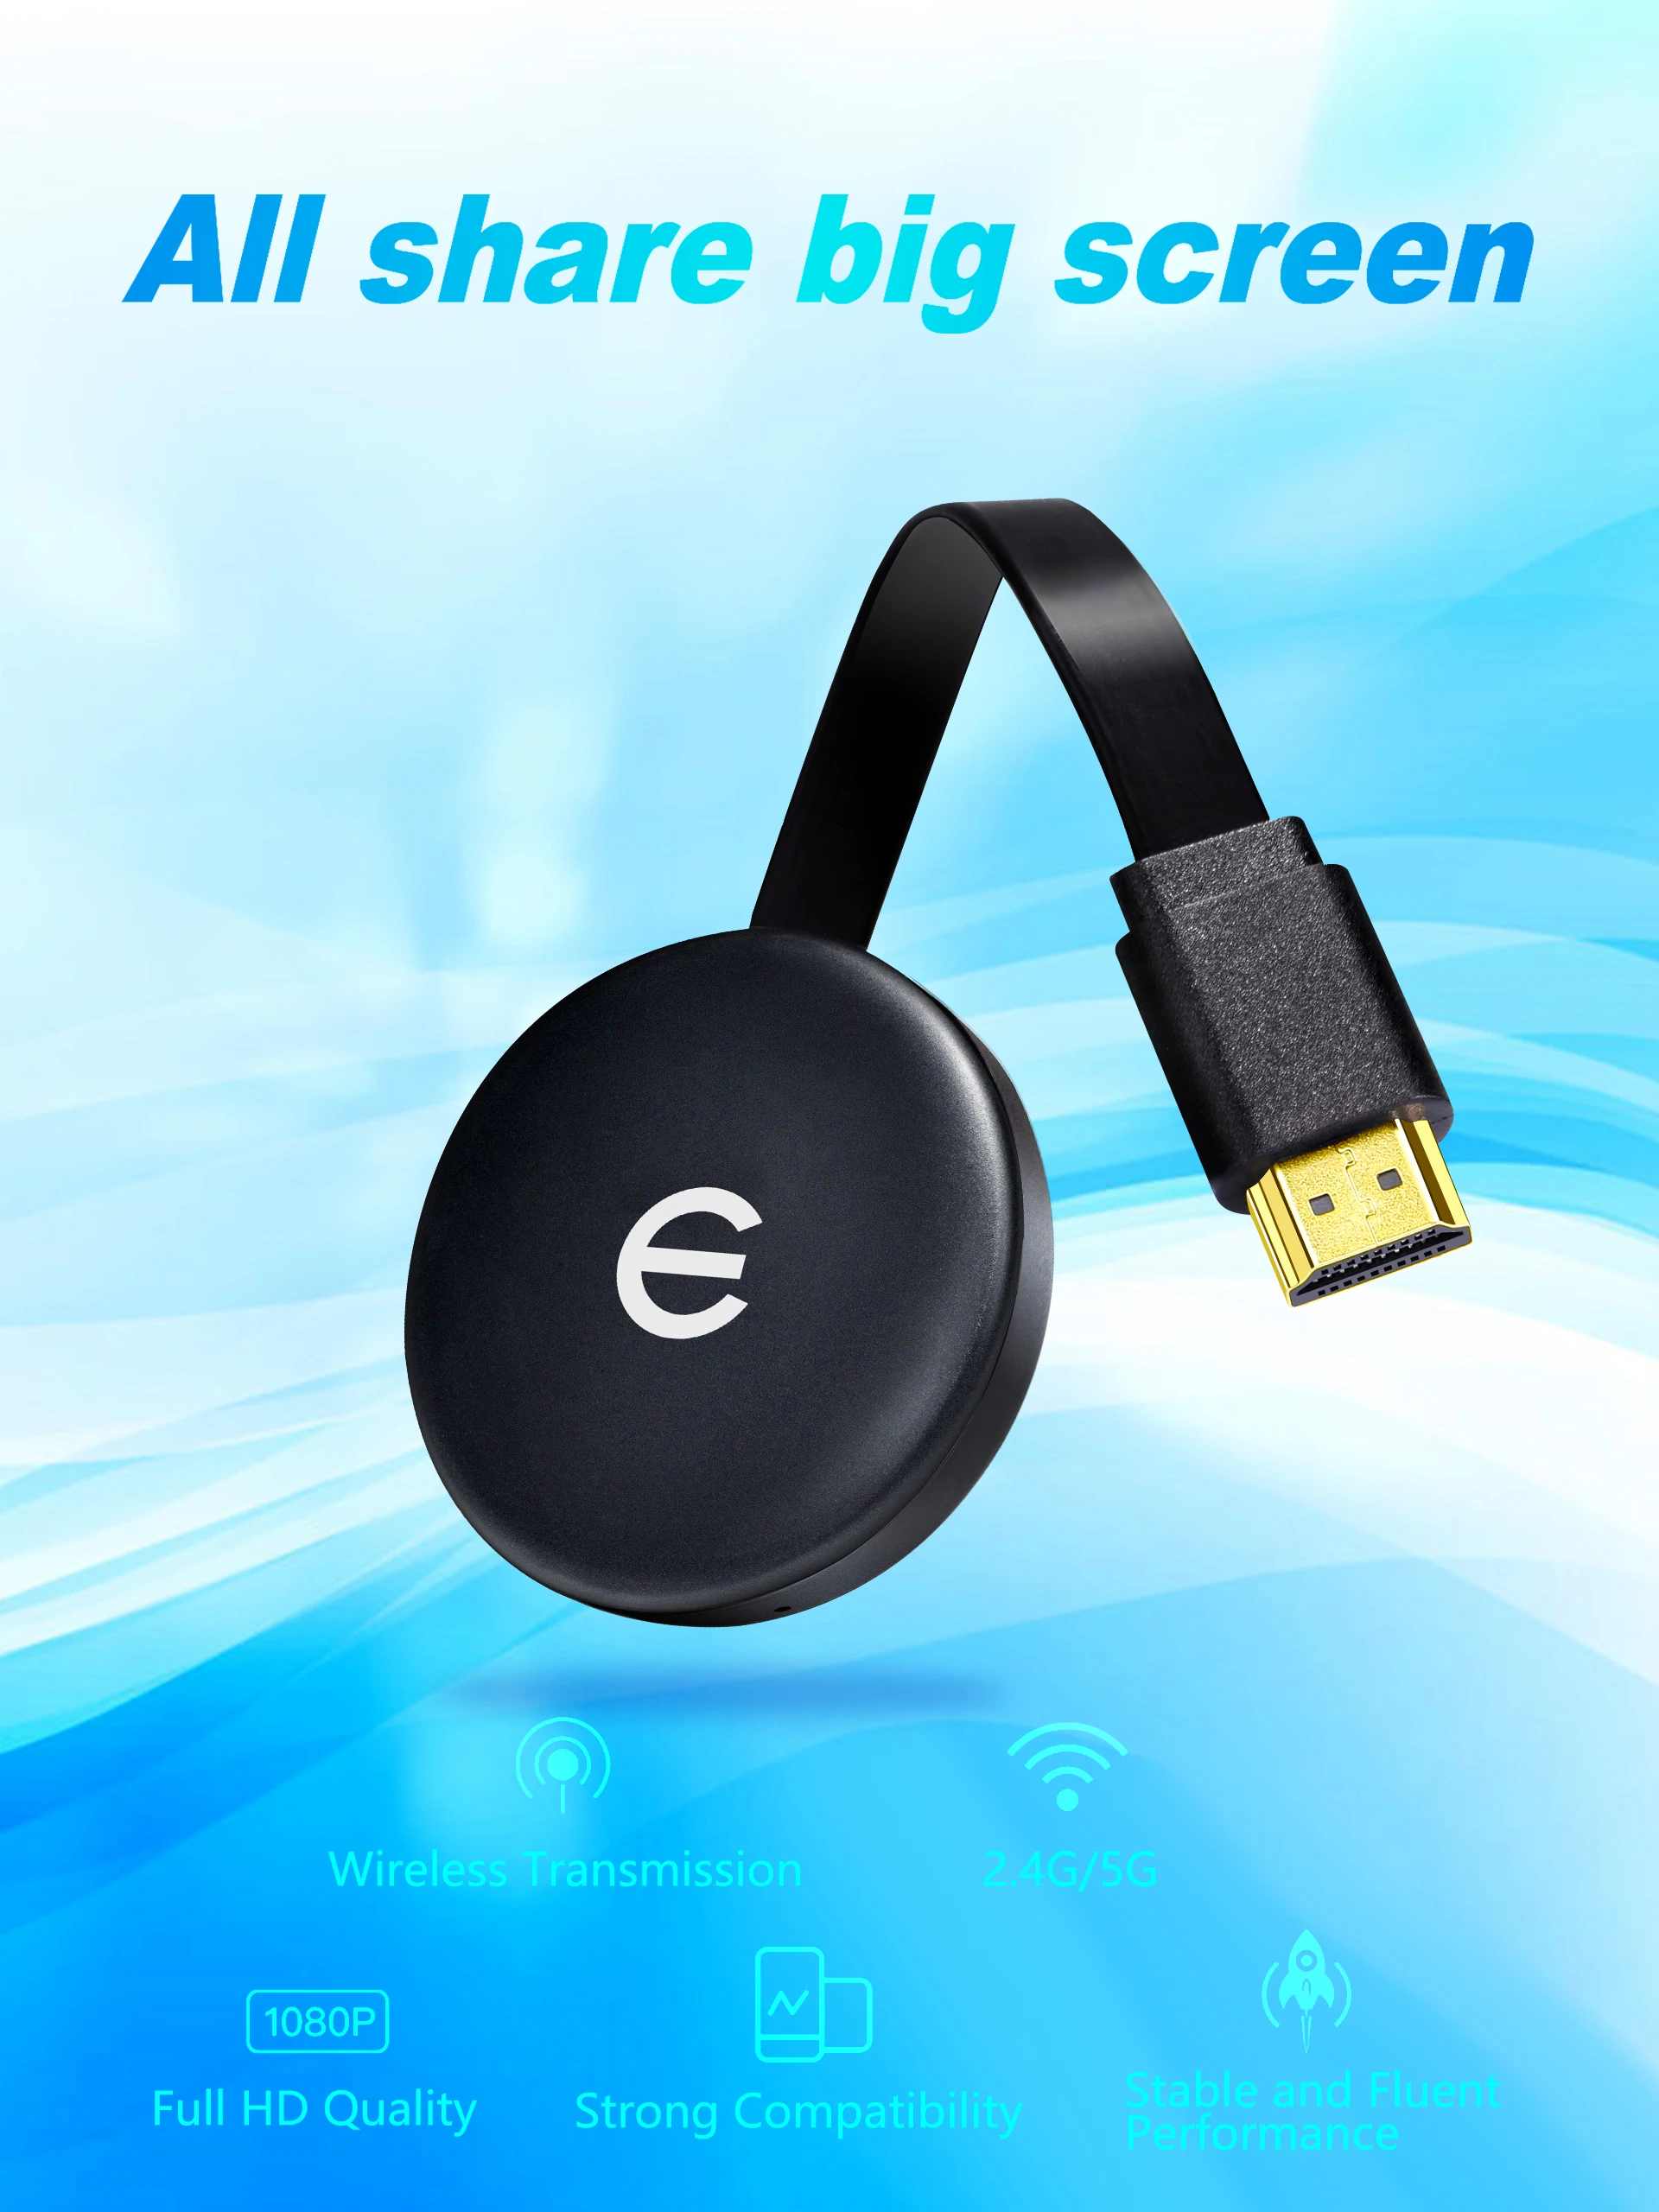 Koogold C13 WiFi-Display-Dongle für Spiegelung und Airplay mit Dual-Core-Miracast-TV-Dongle wie Anycast-Dongle